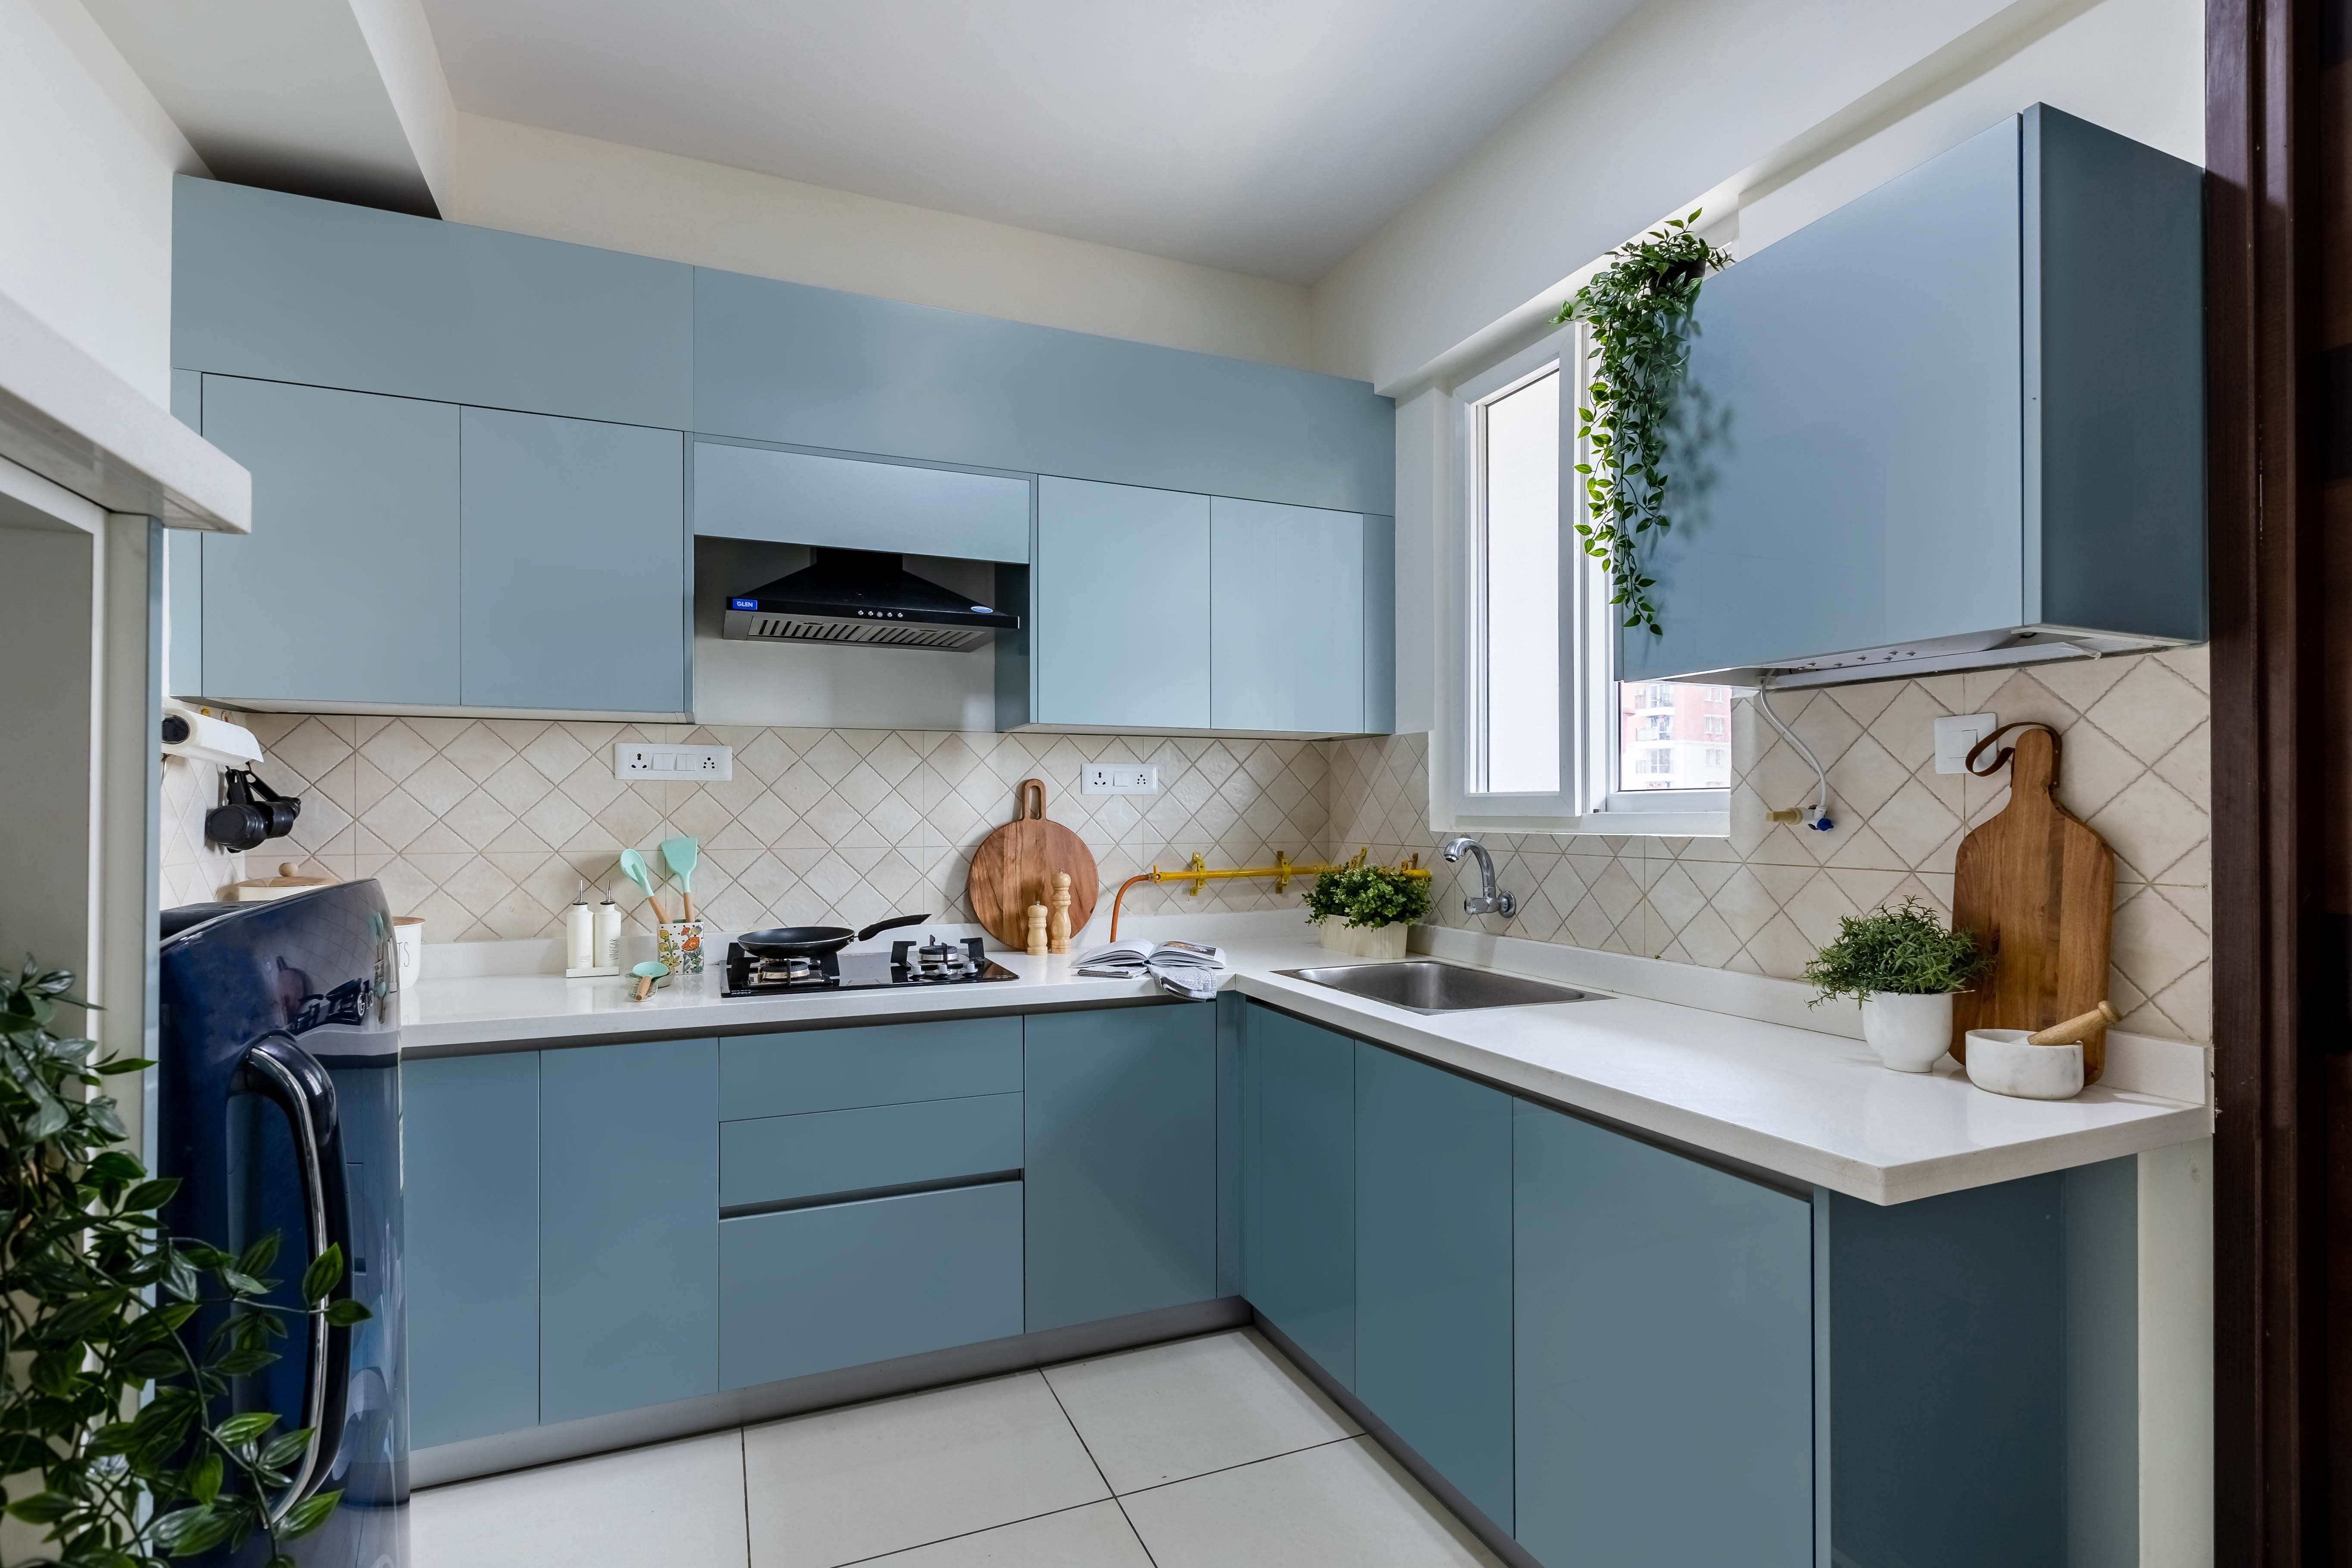 Modern L-Shaped Kitchen Design With Blue Cabinets And Diamond-Patterned Dado Tiles